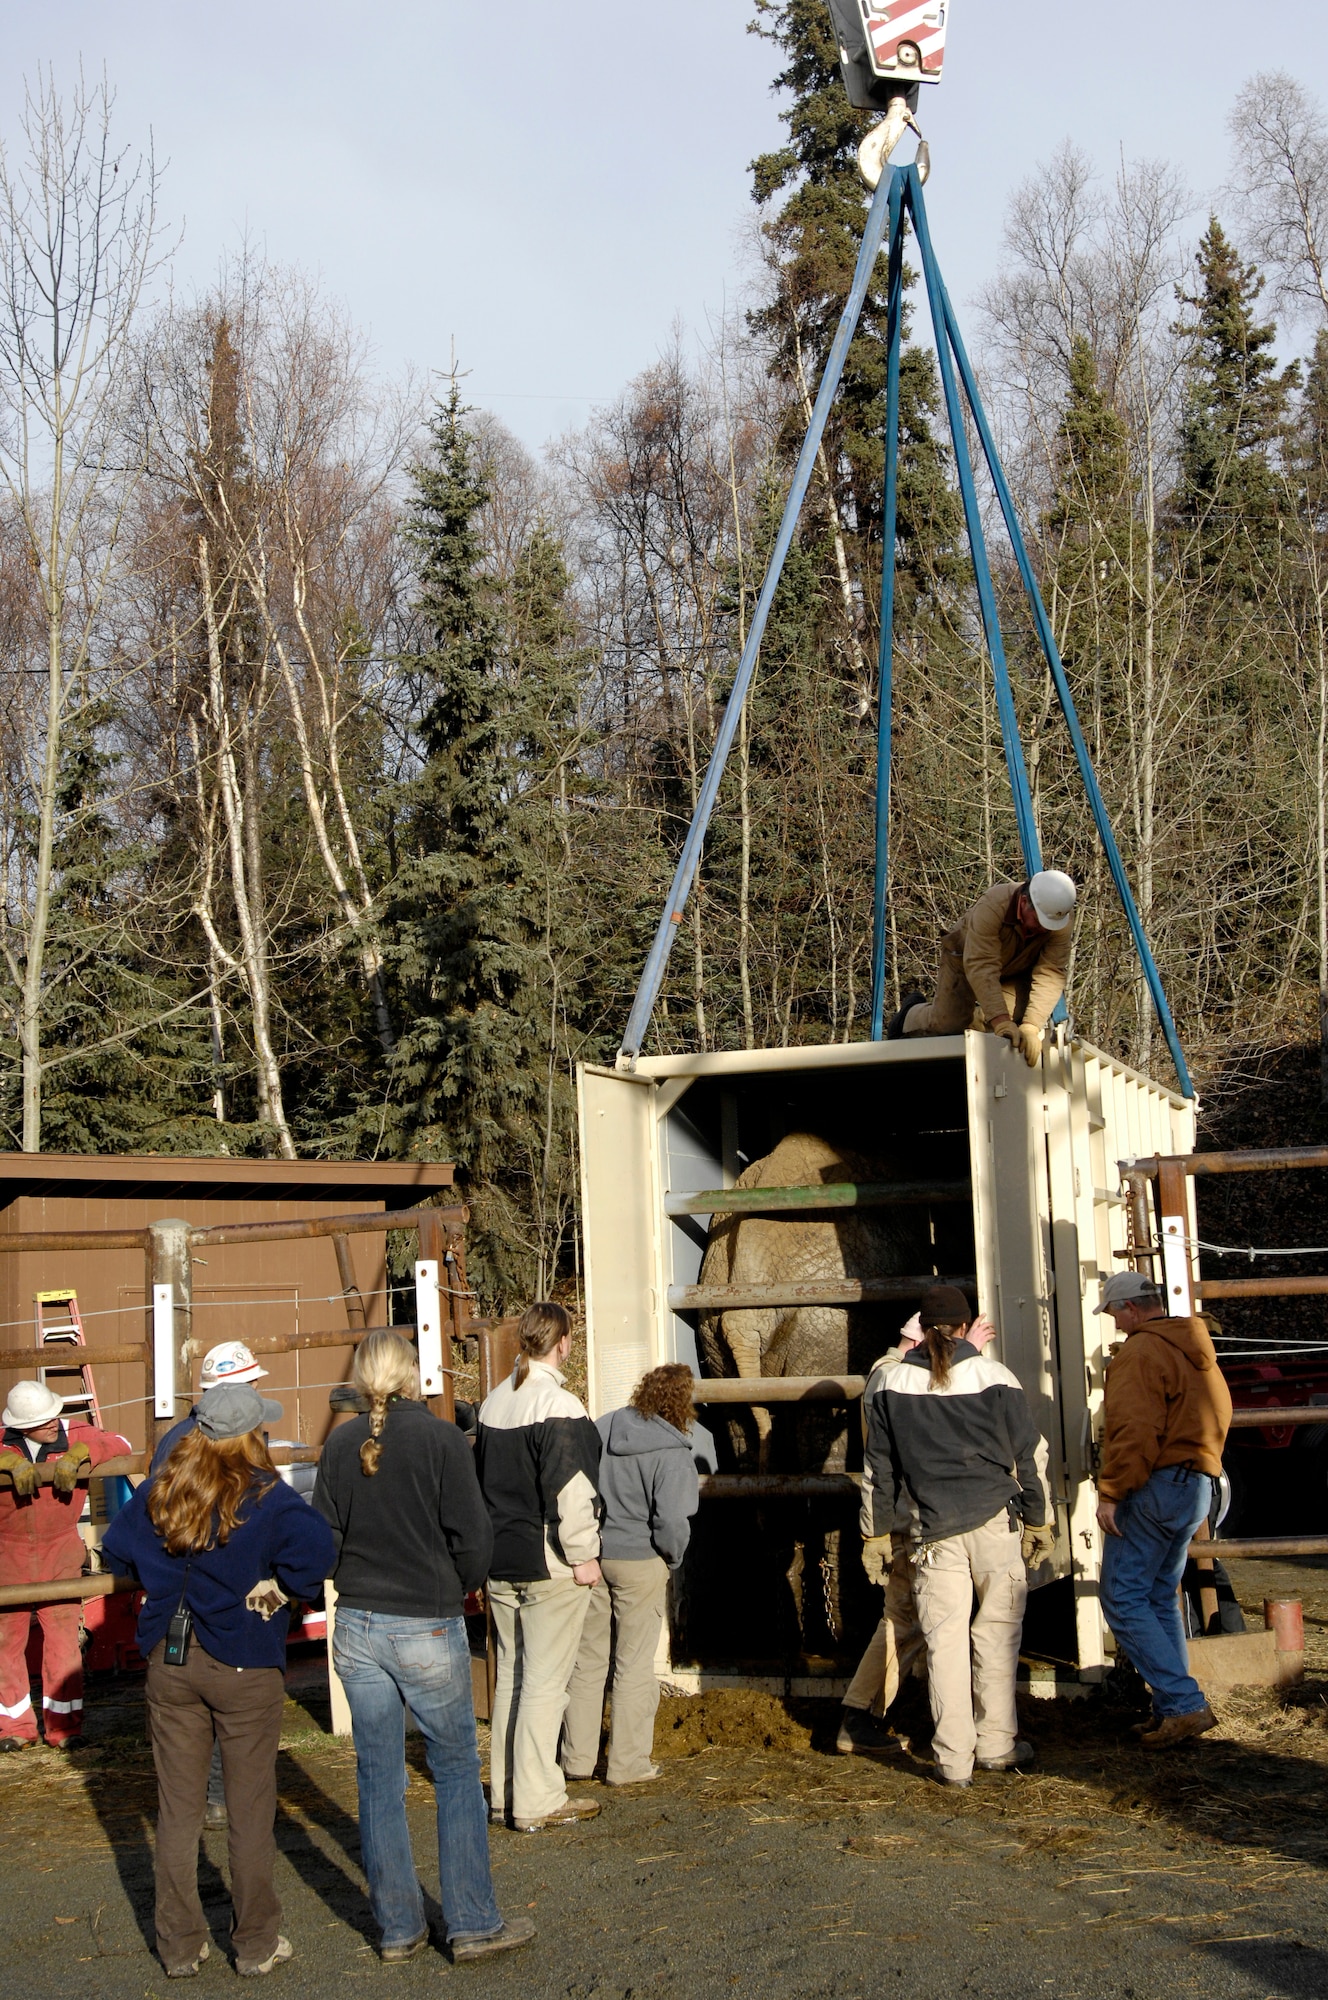 ANCHORAGE, Alaska -- As zoo officials look on, a crane operator secures Maggie's crate before lifting it for transport from the Alaska Zoo to Elmendorf Air Force Base. (U.S. Air Force by Airman 1st Class Jonathan Steffen)